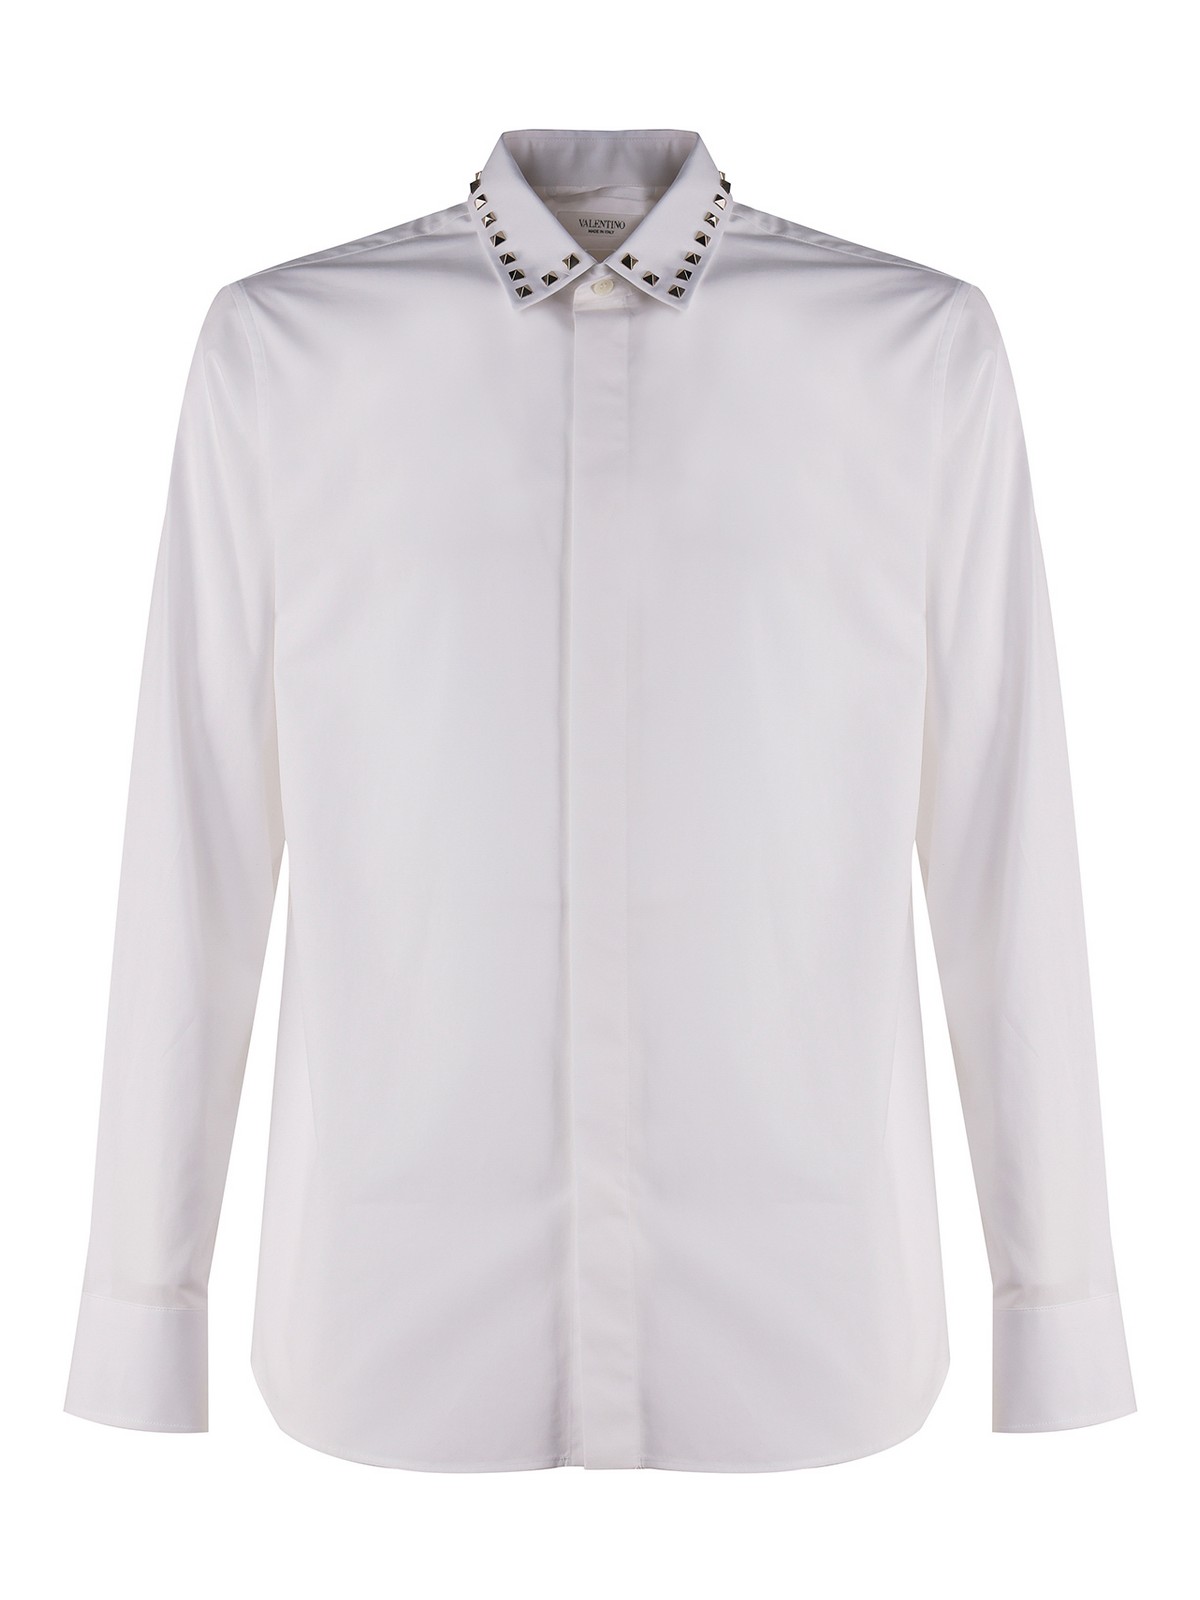 Valentino Cotton Shirt With Studs On Collar In White